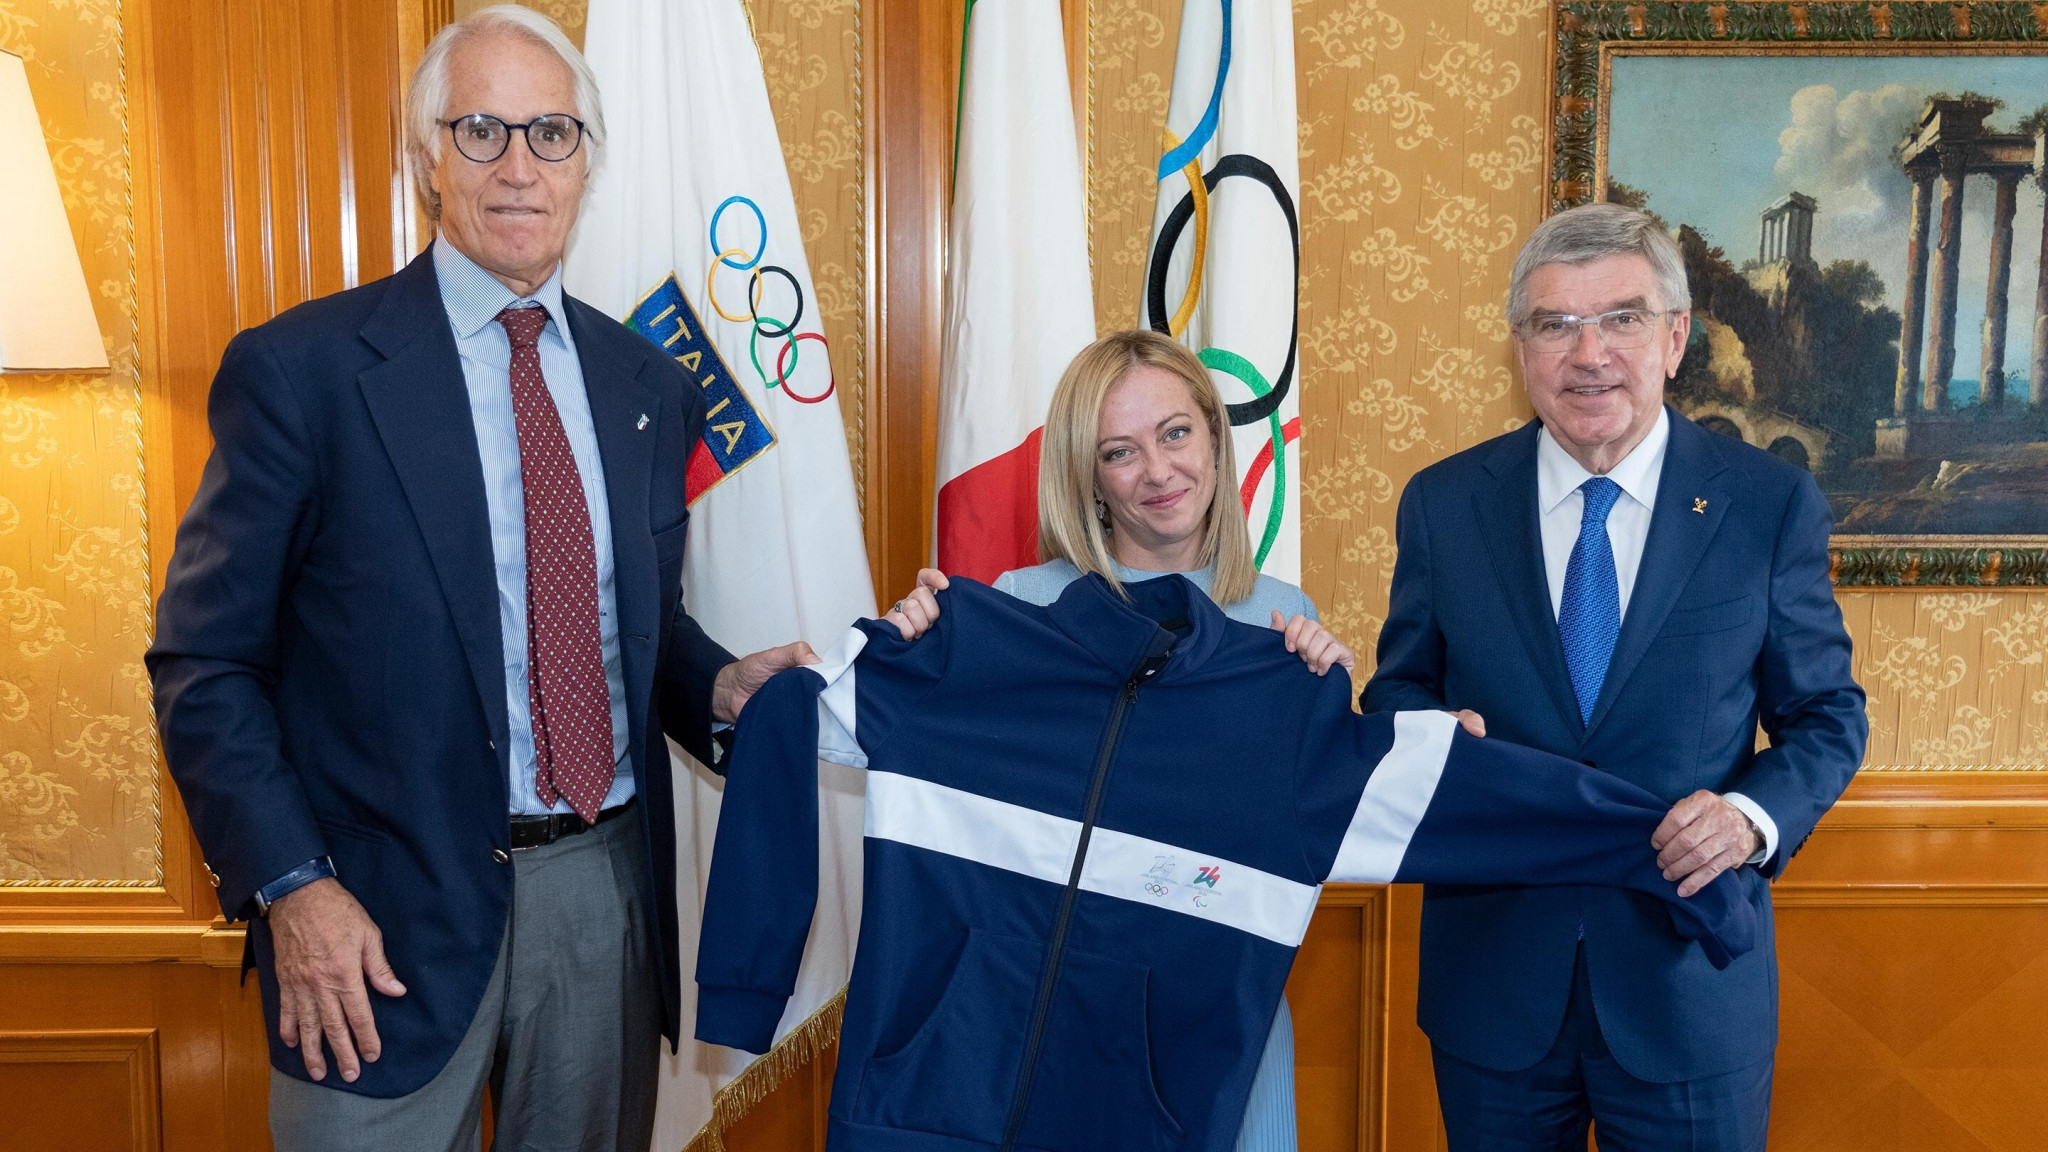 Bach to meet Italian PM as Milan Cortina 2026 speed skating venue due to be ratified